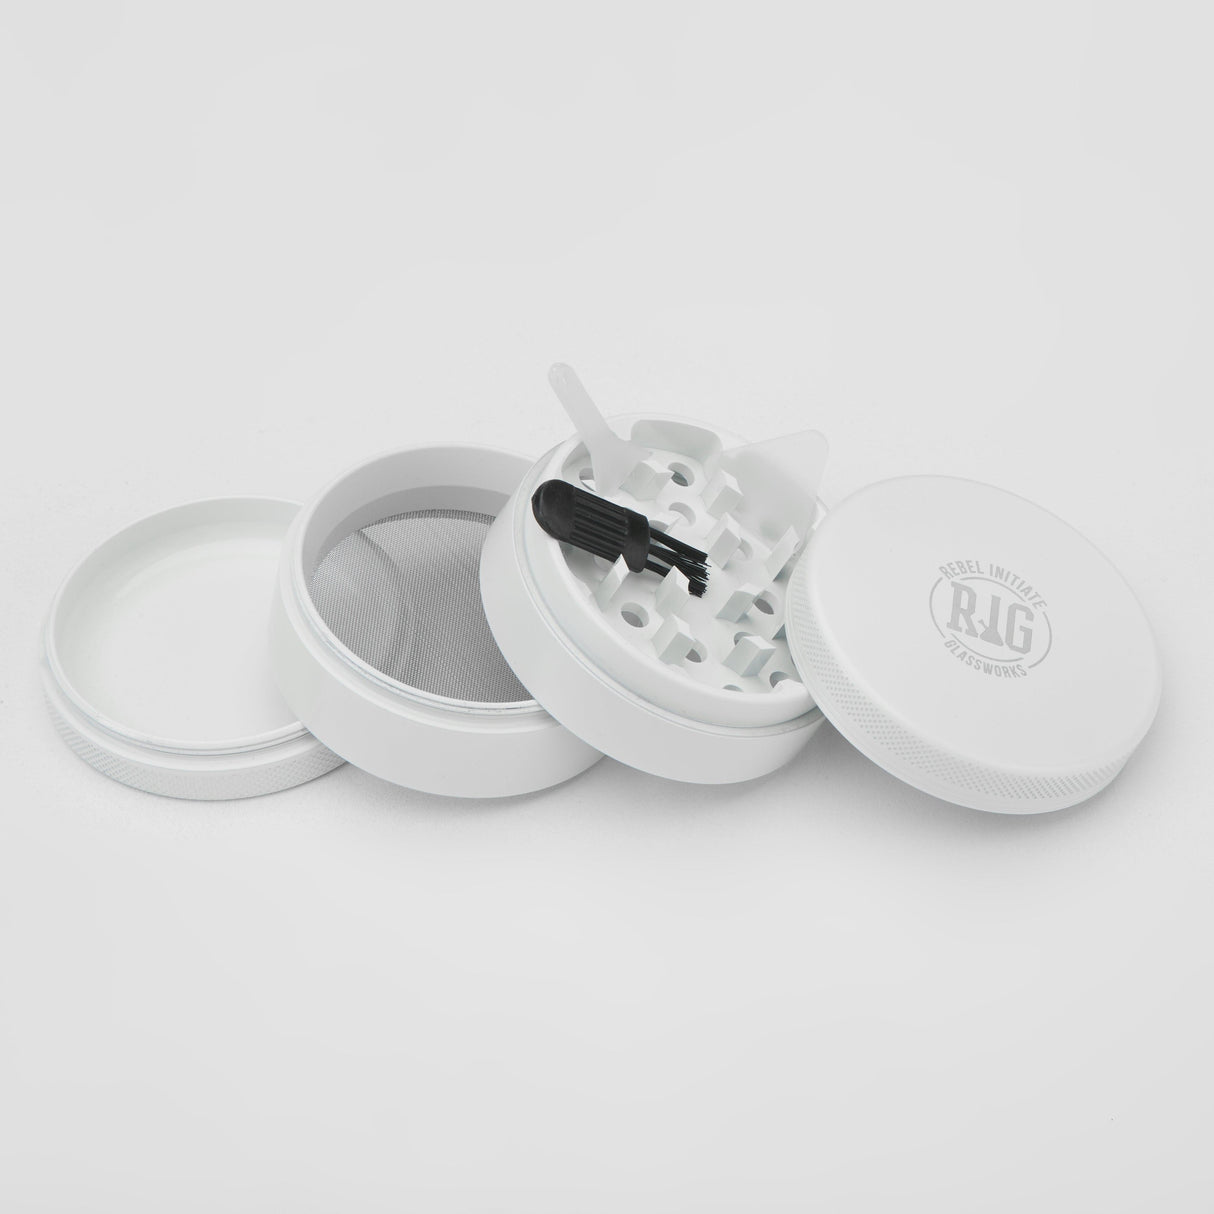 REBEL INITIATE GLASSWORKS 2.2" White Ceramic-coated Aluminum Grinder for Dry Herbs, Open View